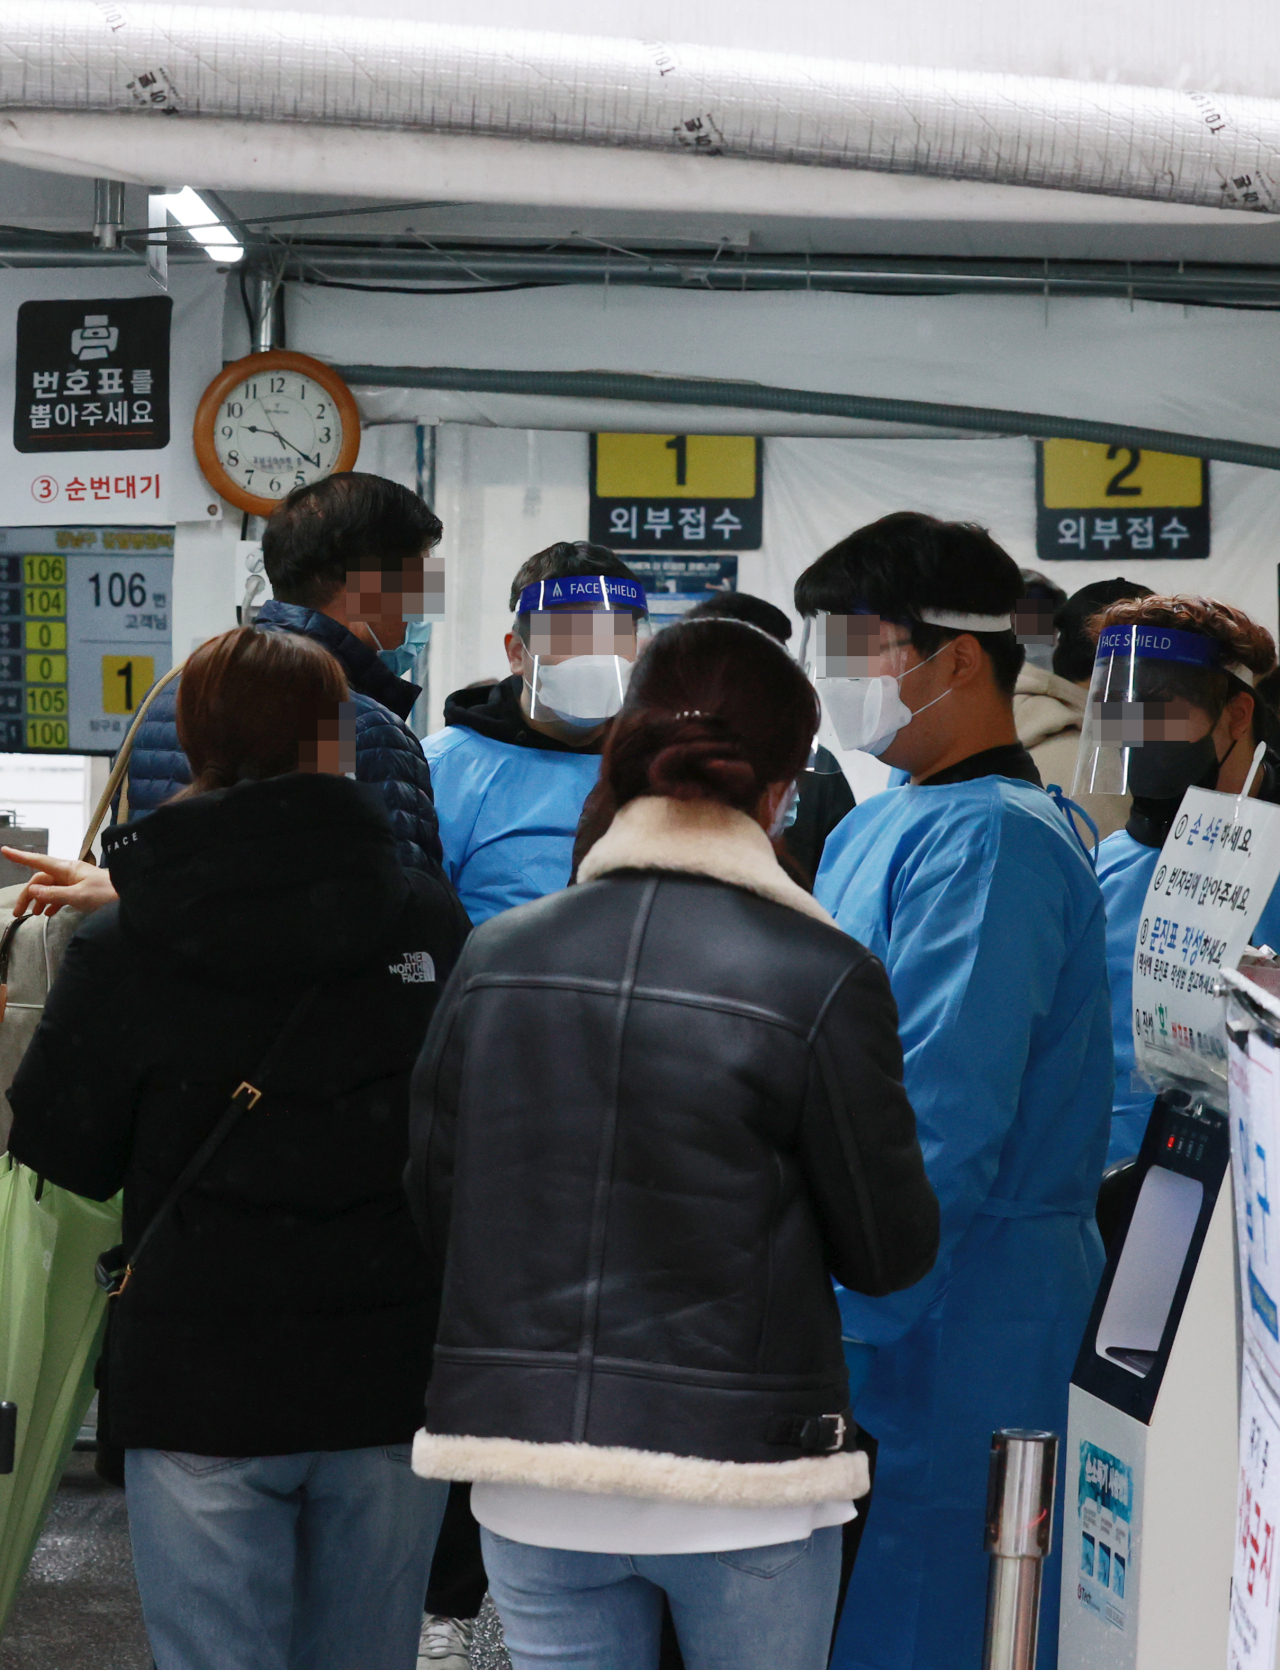 People visit a screening clinic in Seoul's Gangnam Ward on Tuesday, to receive coronavirus tests. South Korea's new coronavirus cases stayed below 2,000 for the second straight day, but health authorities remain on alert over a possible spike in new infections under eased virus curbs. (Yonhap)